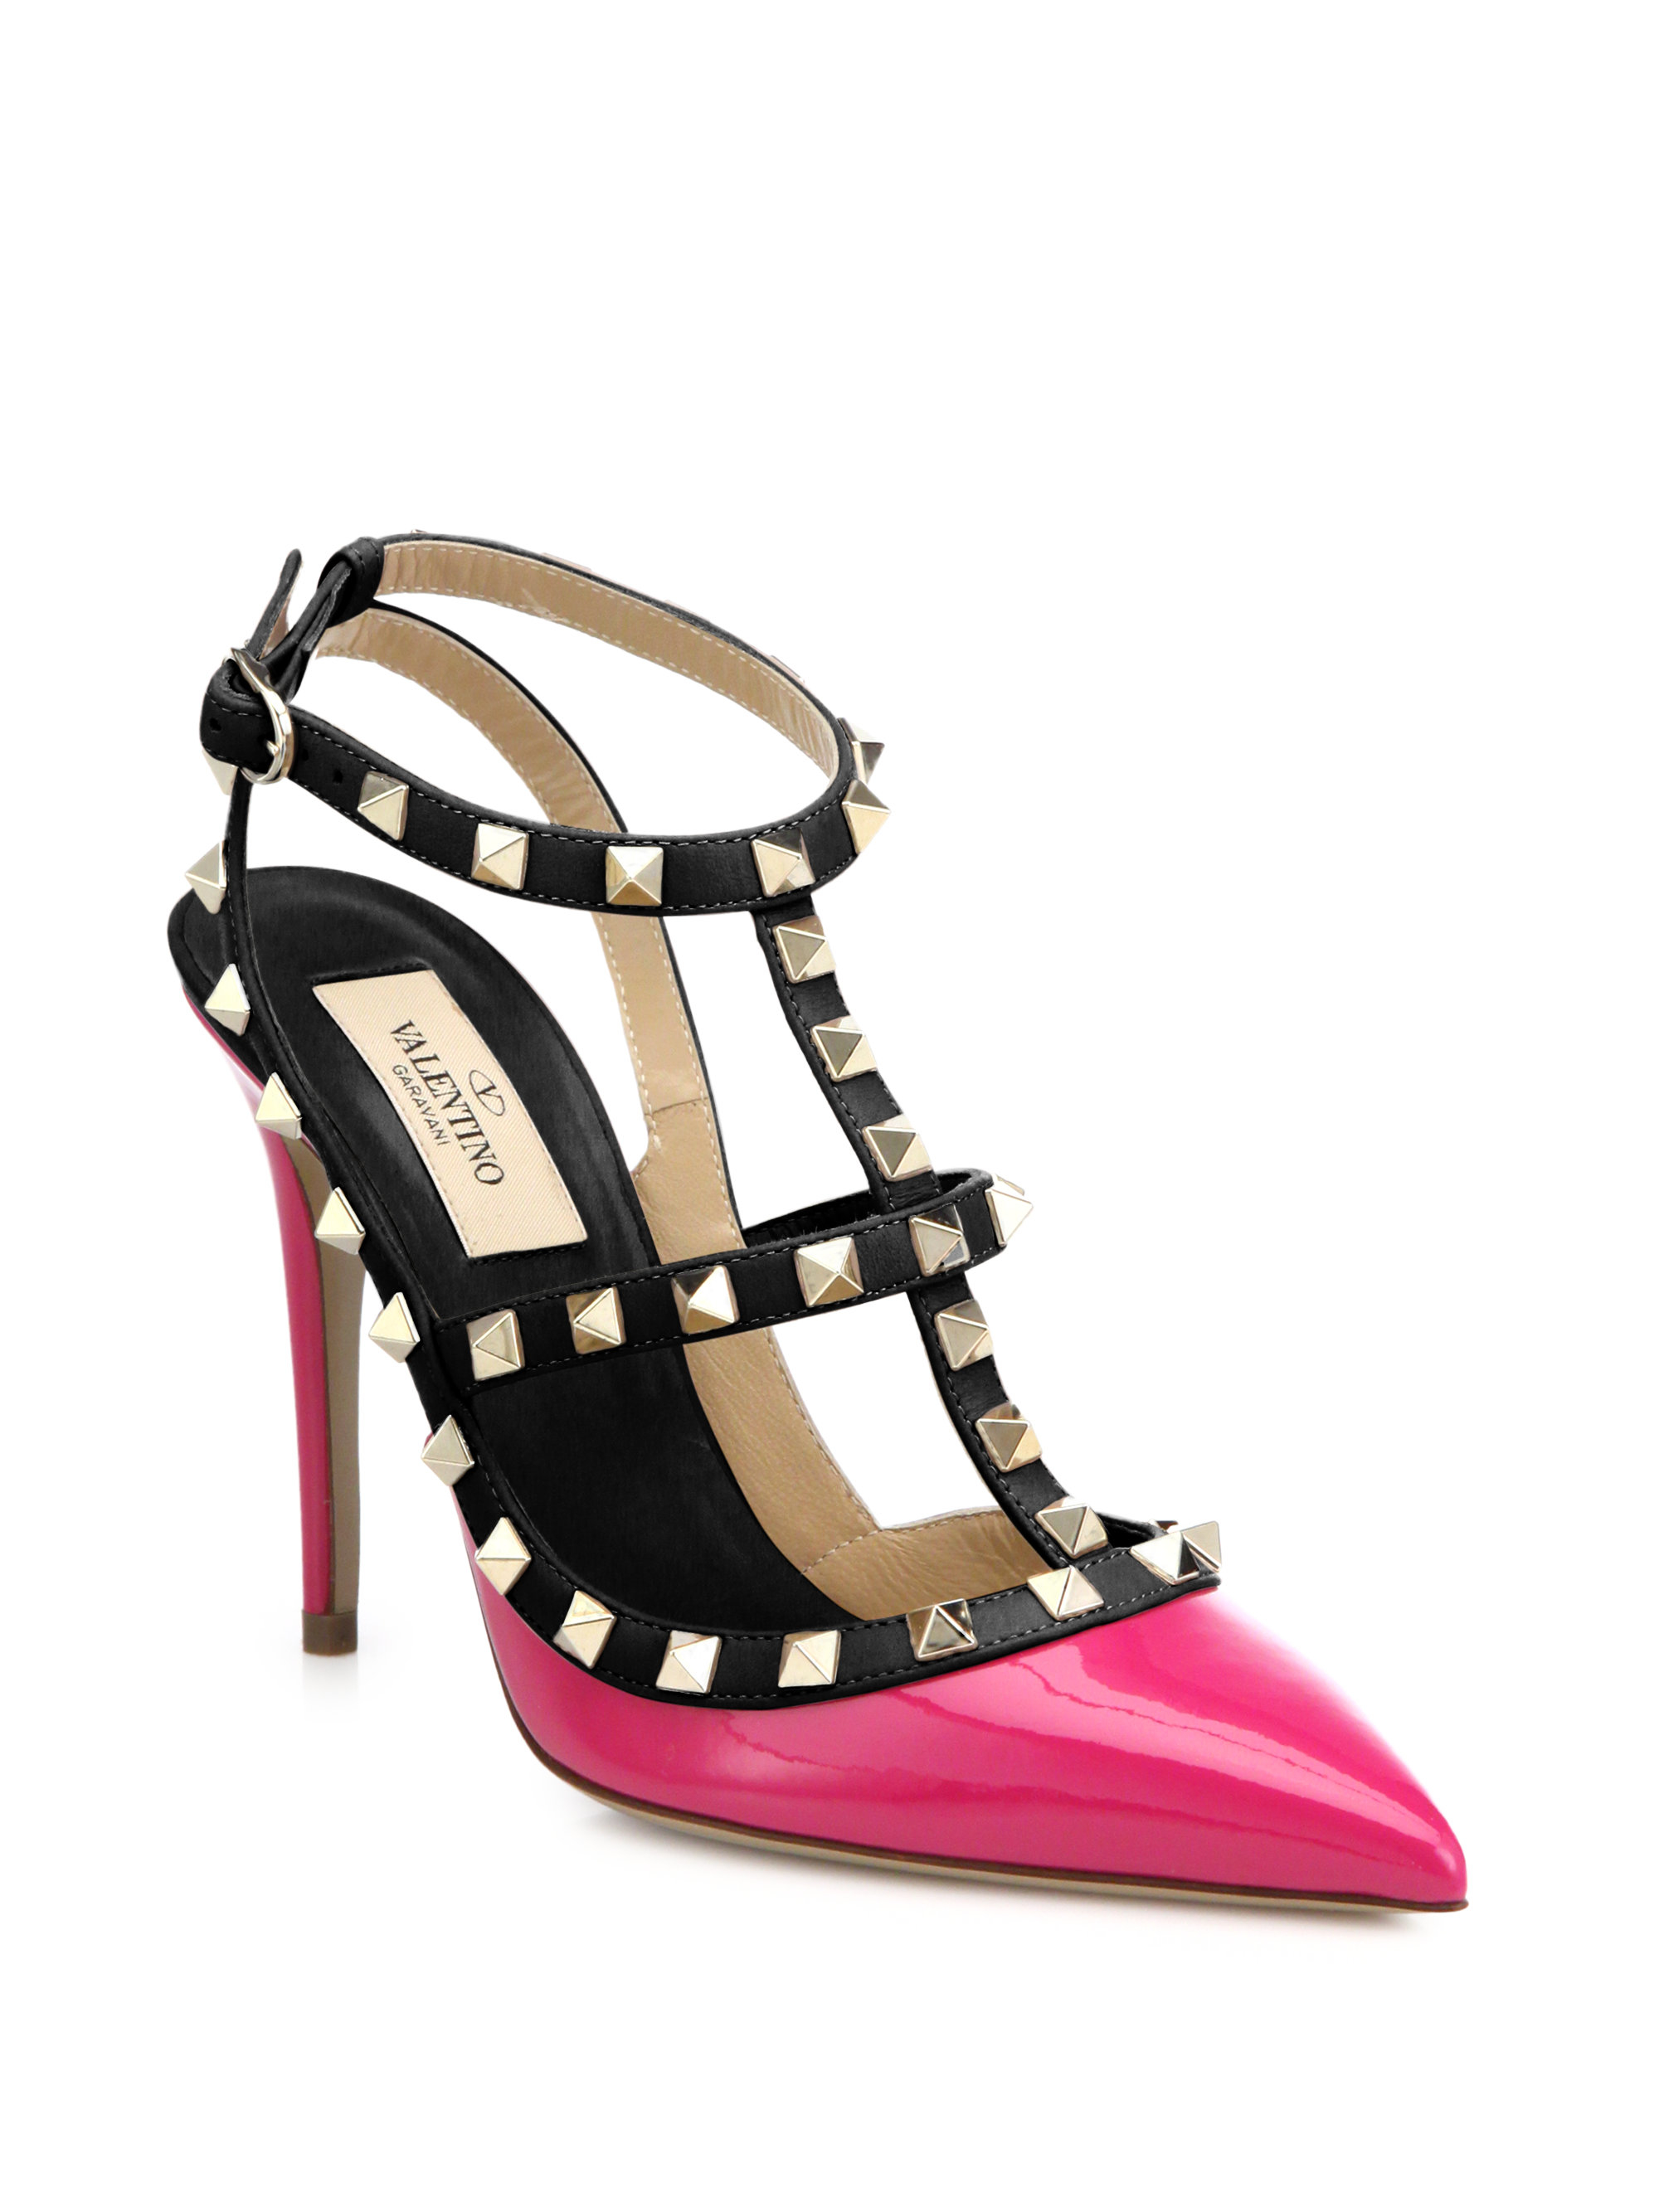 Valentino Rockstud Patent Leather Pumps in Pink | Lyst